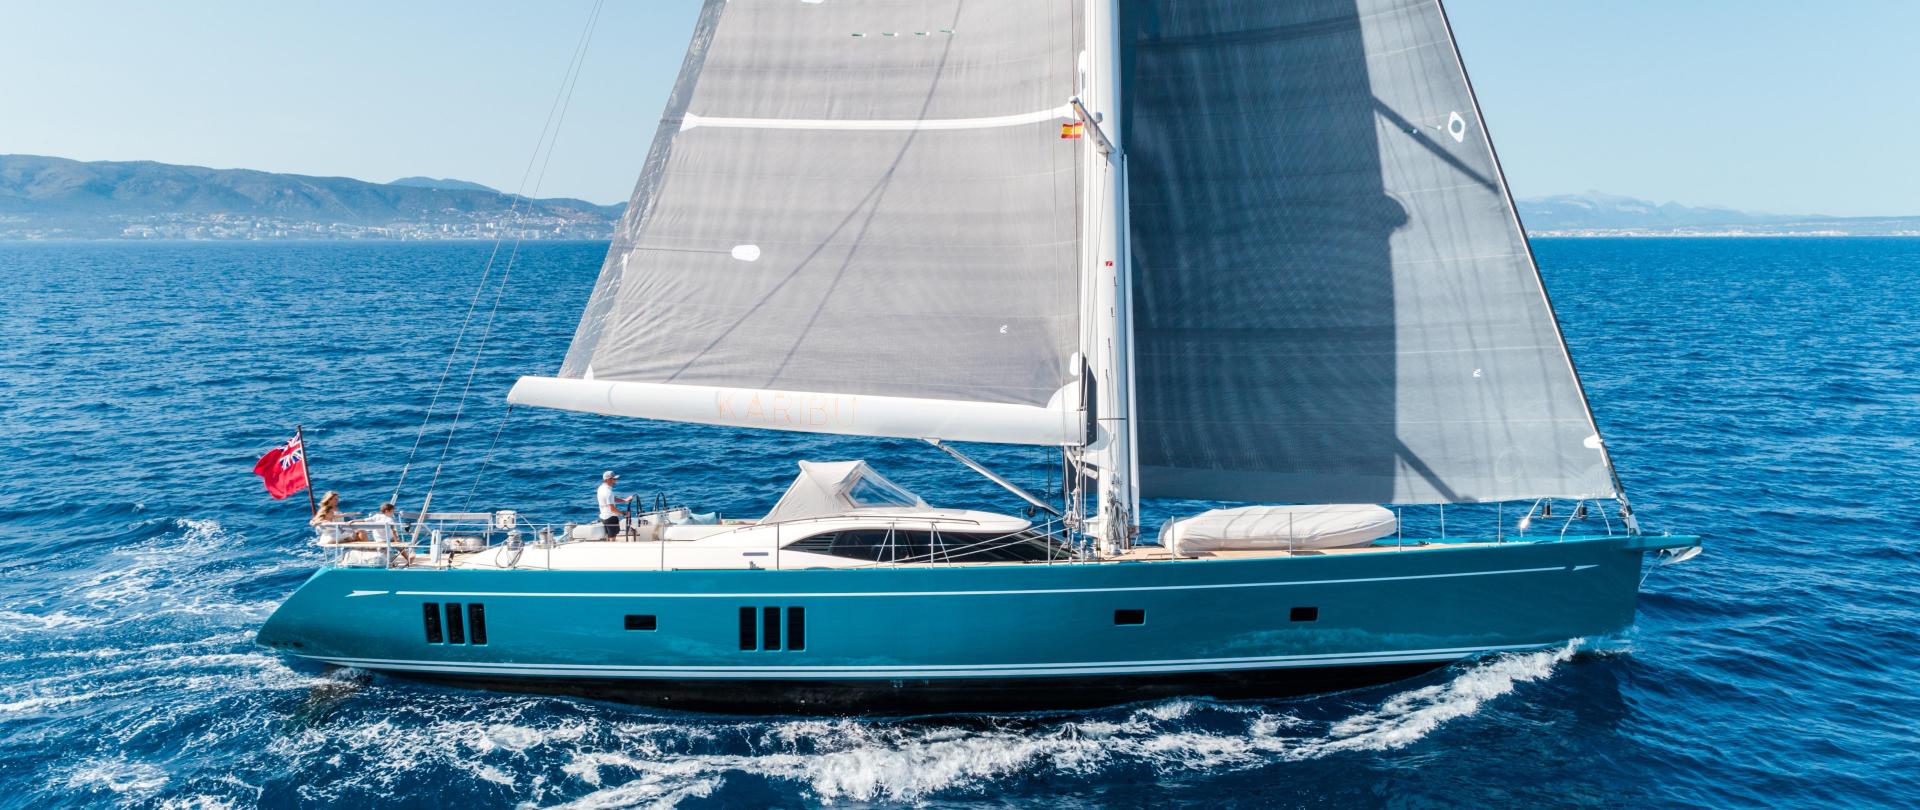 Oyster 885 charter sailing yacht